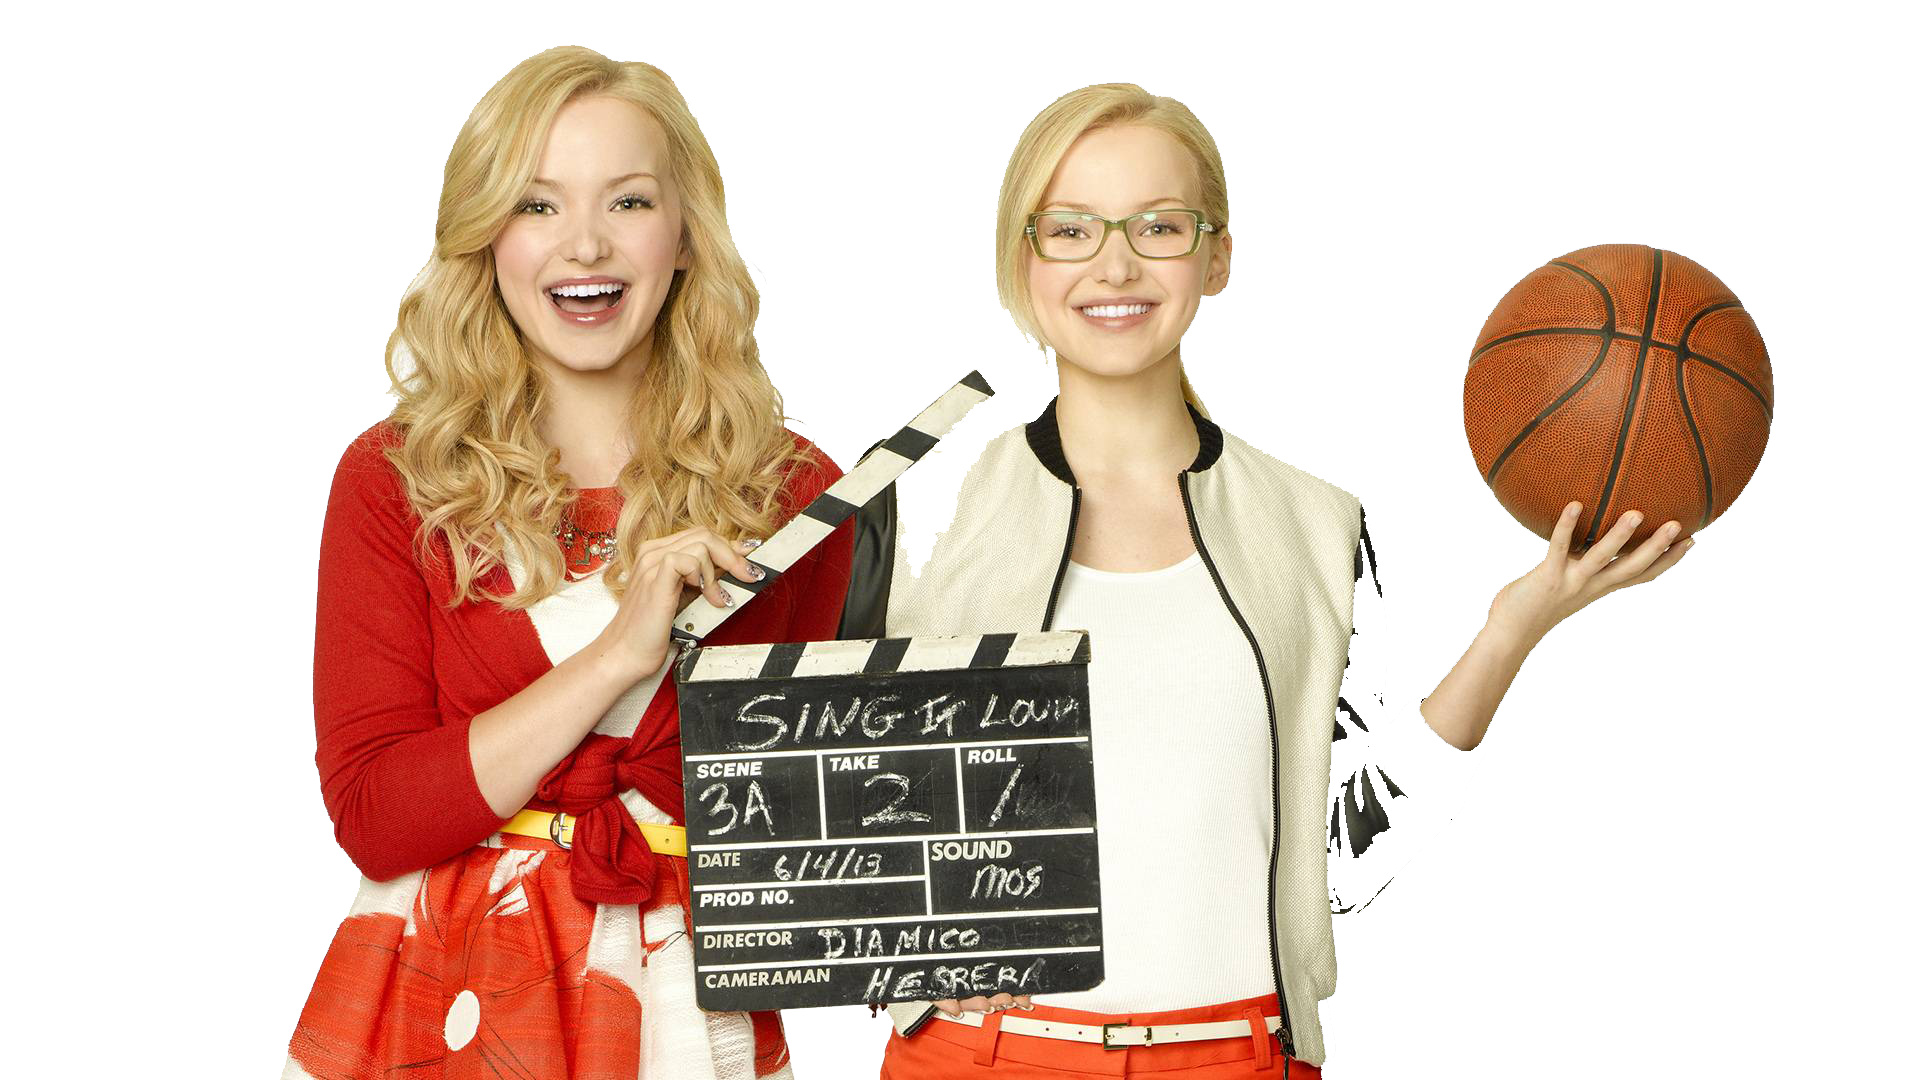 Liv and Maddie, PNG pack, Dove Cameron edits, 1920x1080 Full HD Desktop